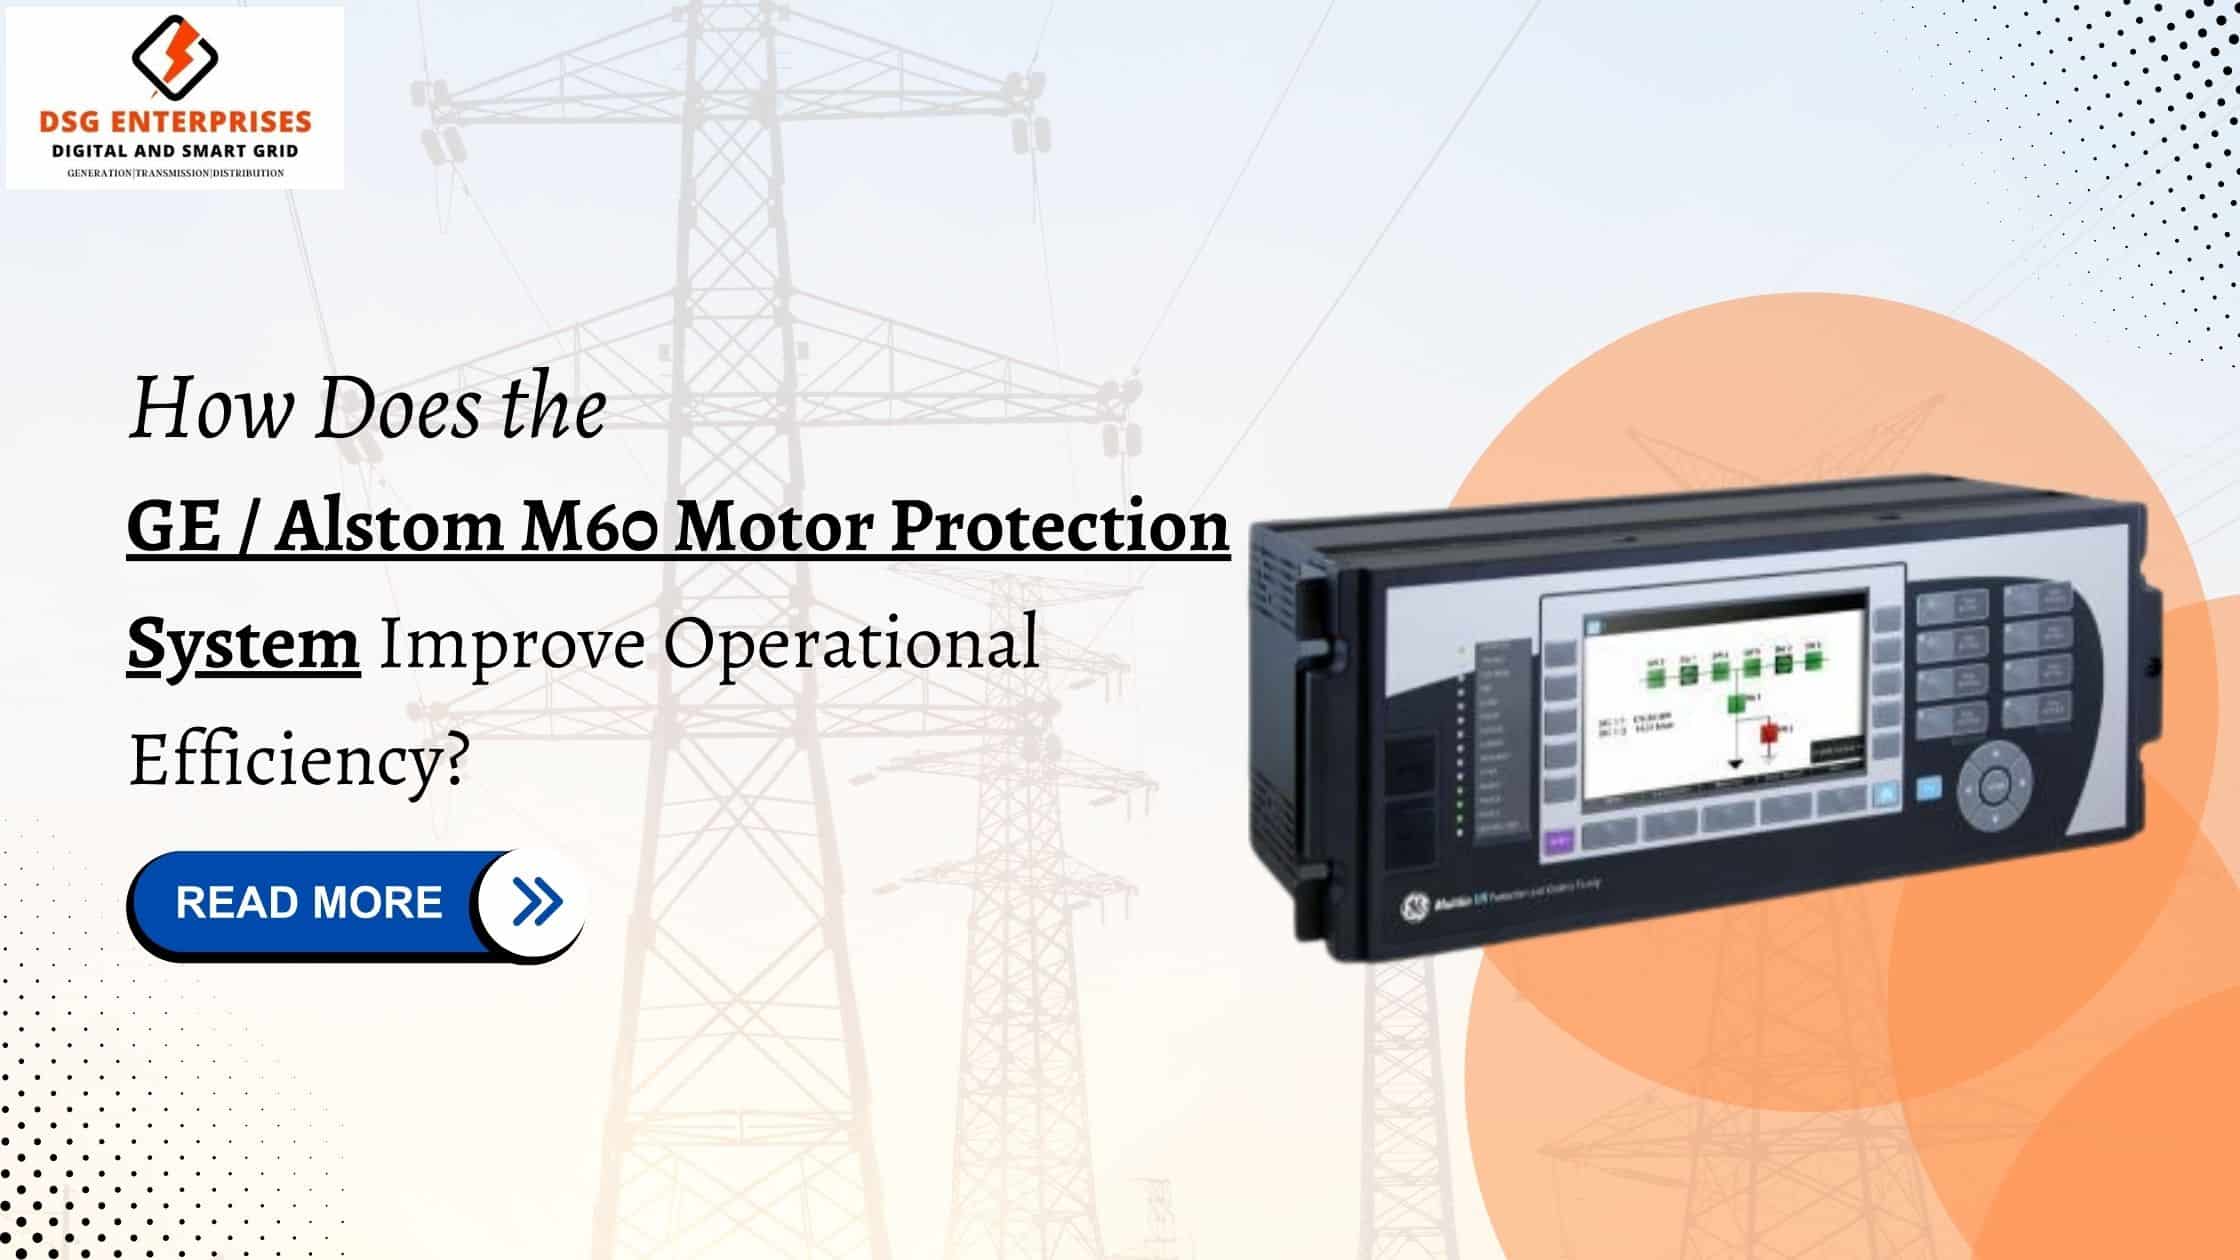 You are currently viewing How Does the GE / Alstom M60 Motor Protection System Improve Operational Efficiency?